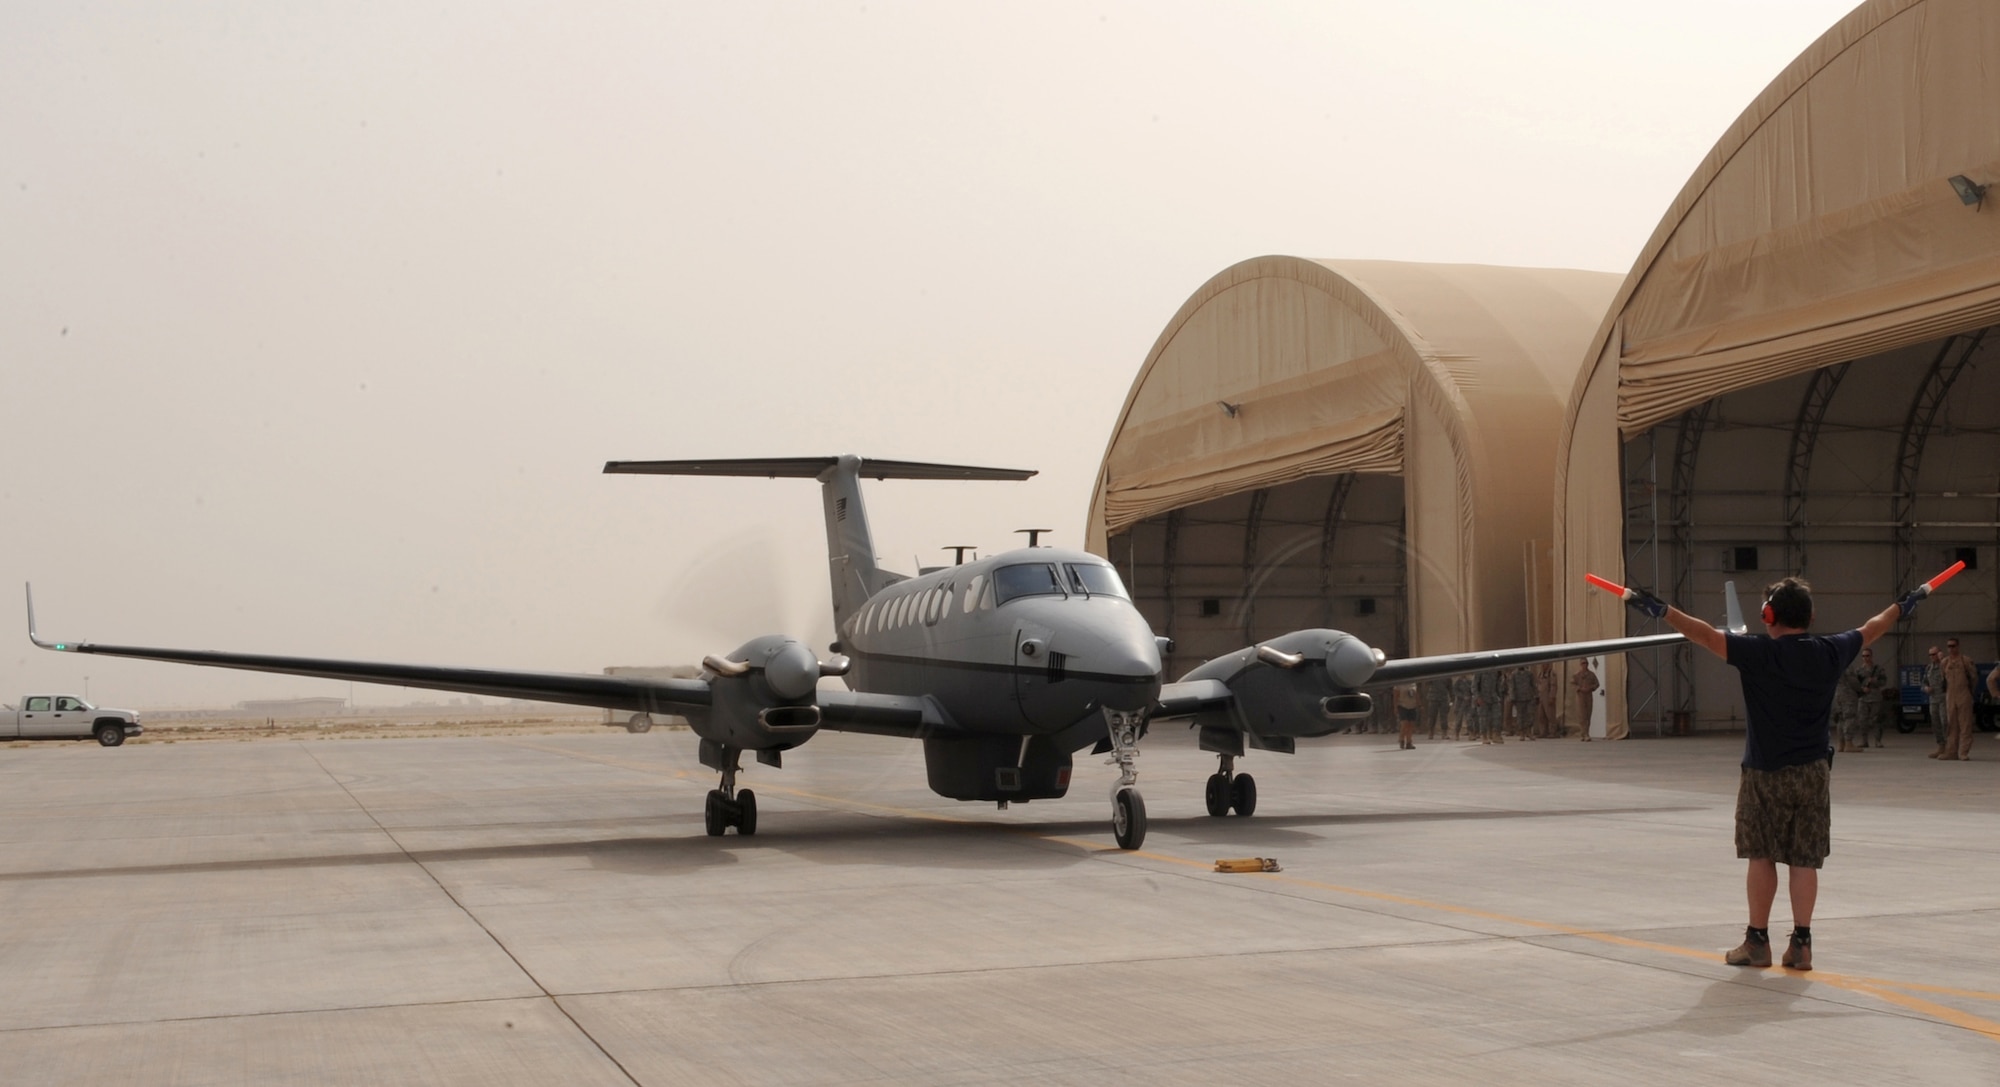 JOINT BASE BALAD, Iraq — The Air Force's new MC-12 Liberty aircraft, and the first one deployed in-theater, taxies into an aircraft hanger here June 8. A medium-altitude manned special-mission turboprop aircraft designed for intelligence, surveillance and reconnaissance, MC-12 aircraft will operate from here in support of Coalition and joint ground forces. (U.S. Air Force photo/Senior Airman Tiffany Trojca)